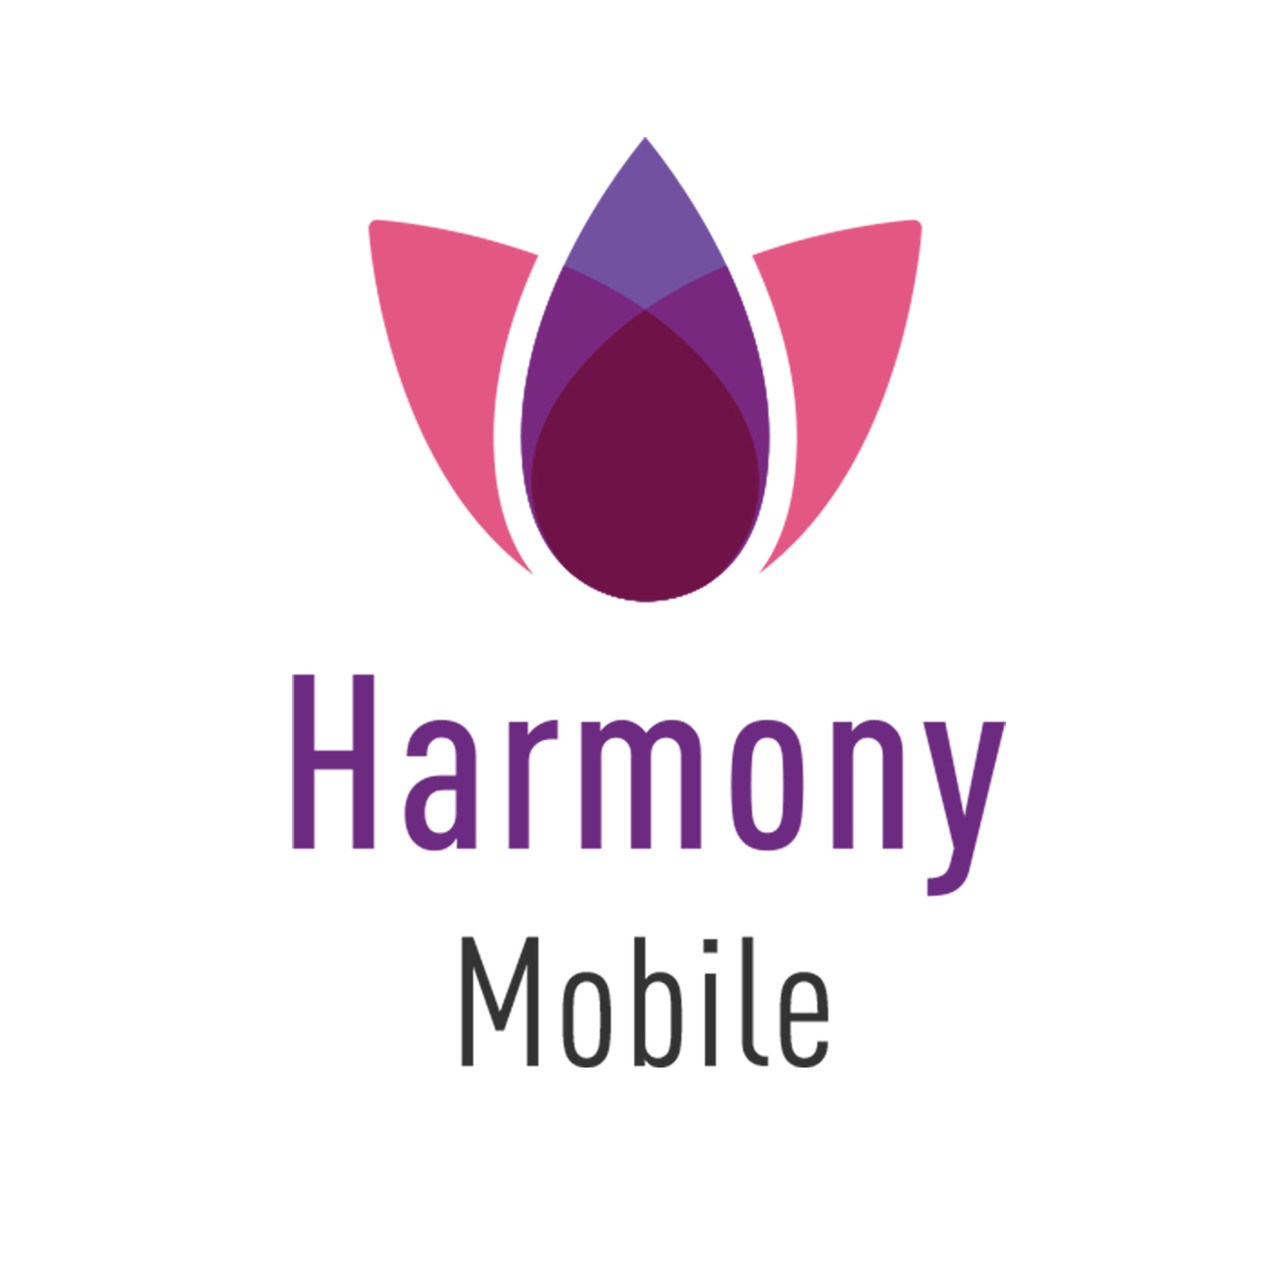 Check Point Harmony Mobile Per User, Single Device, Standard direct support, 1 year0 